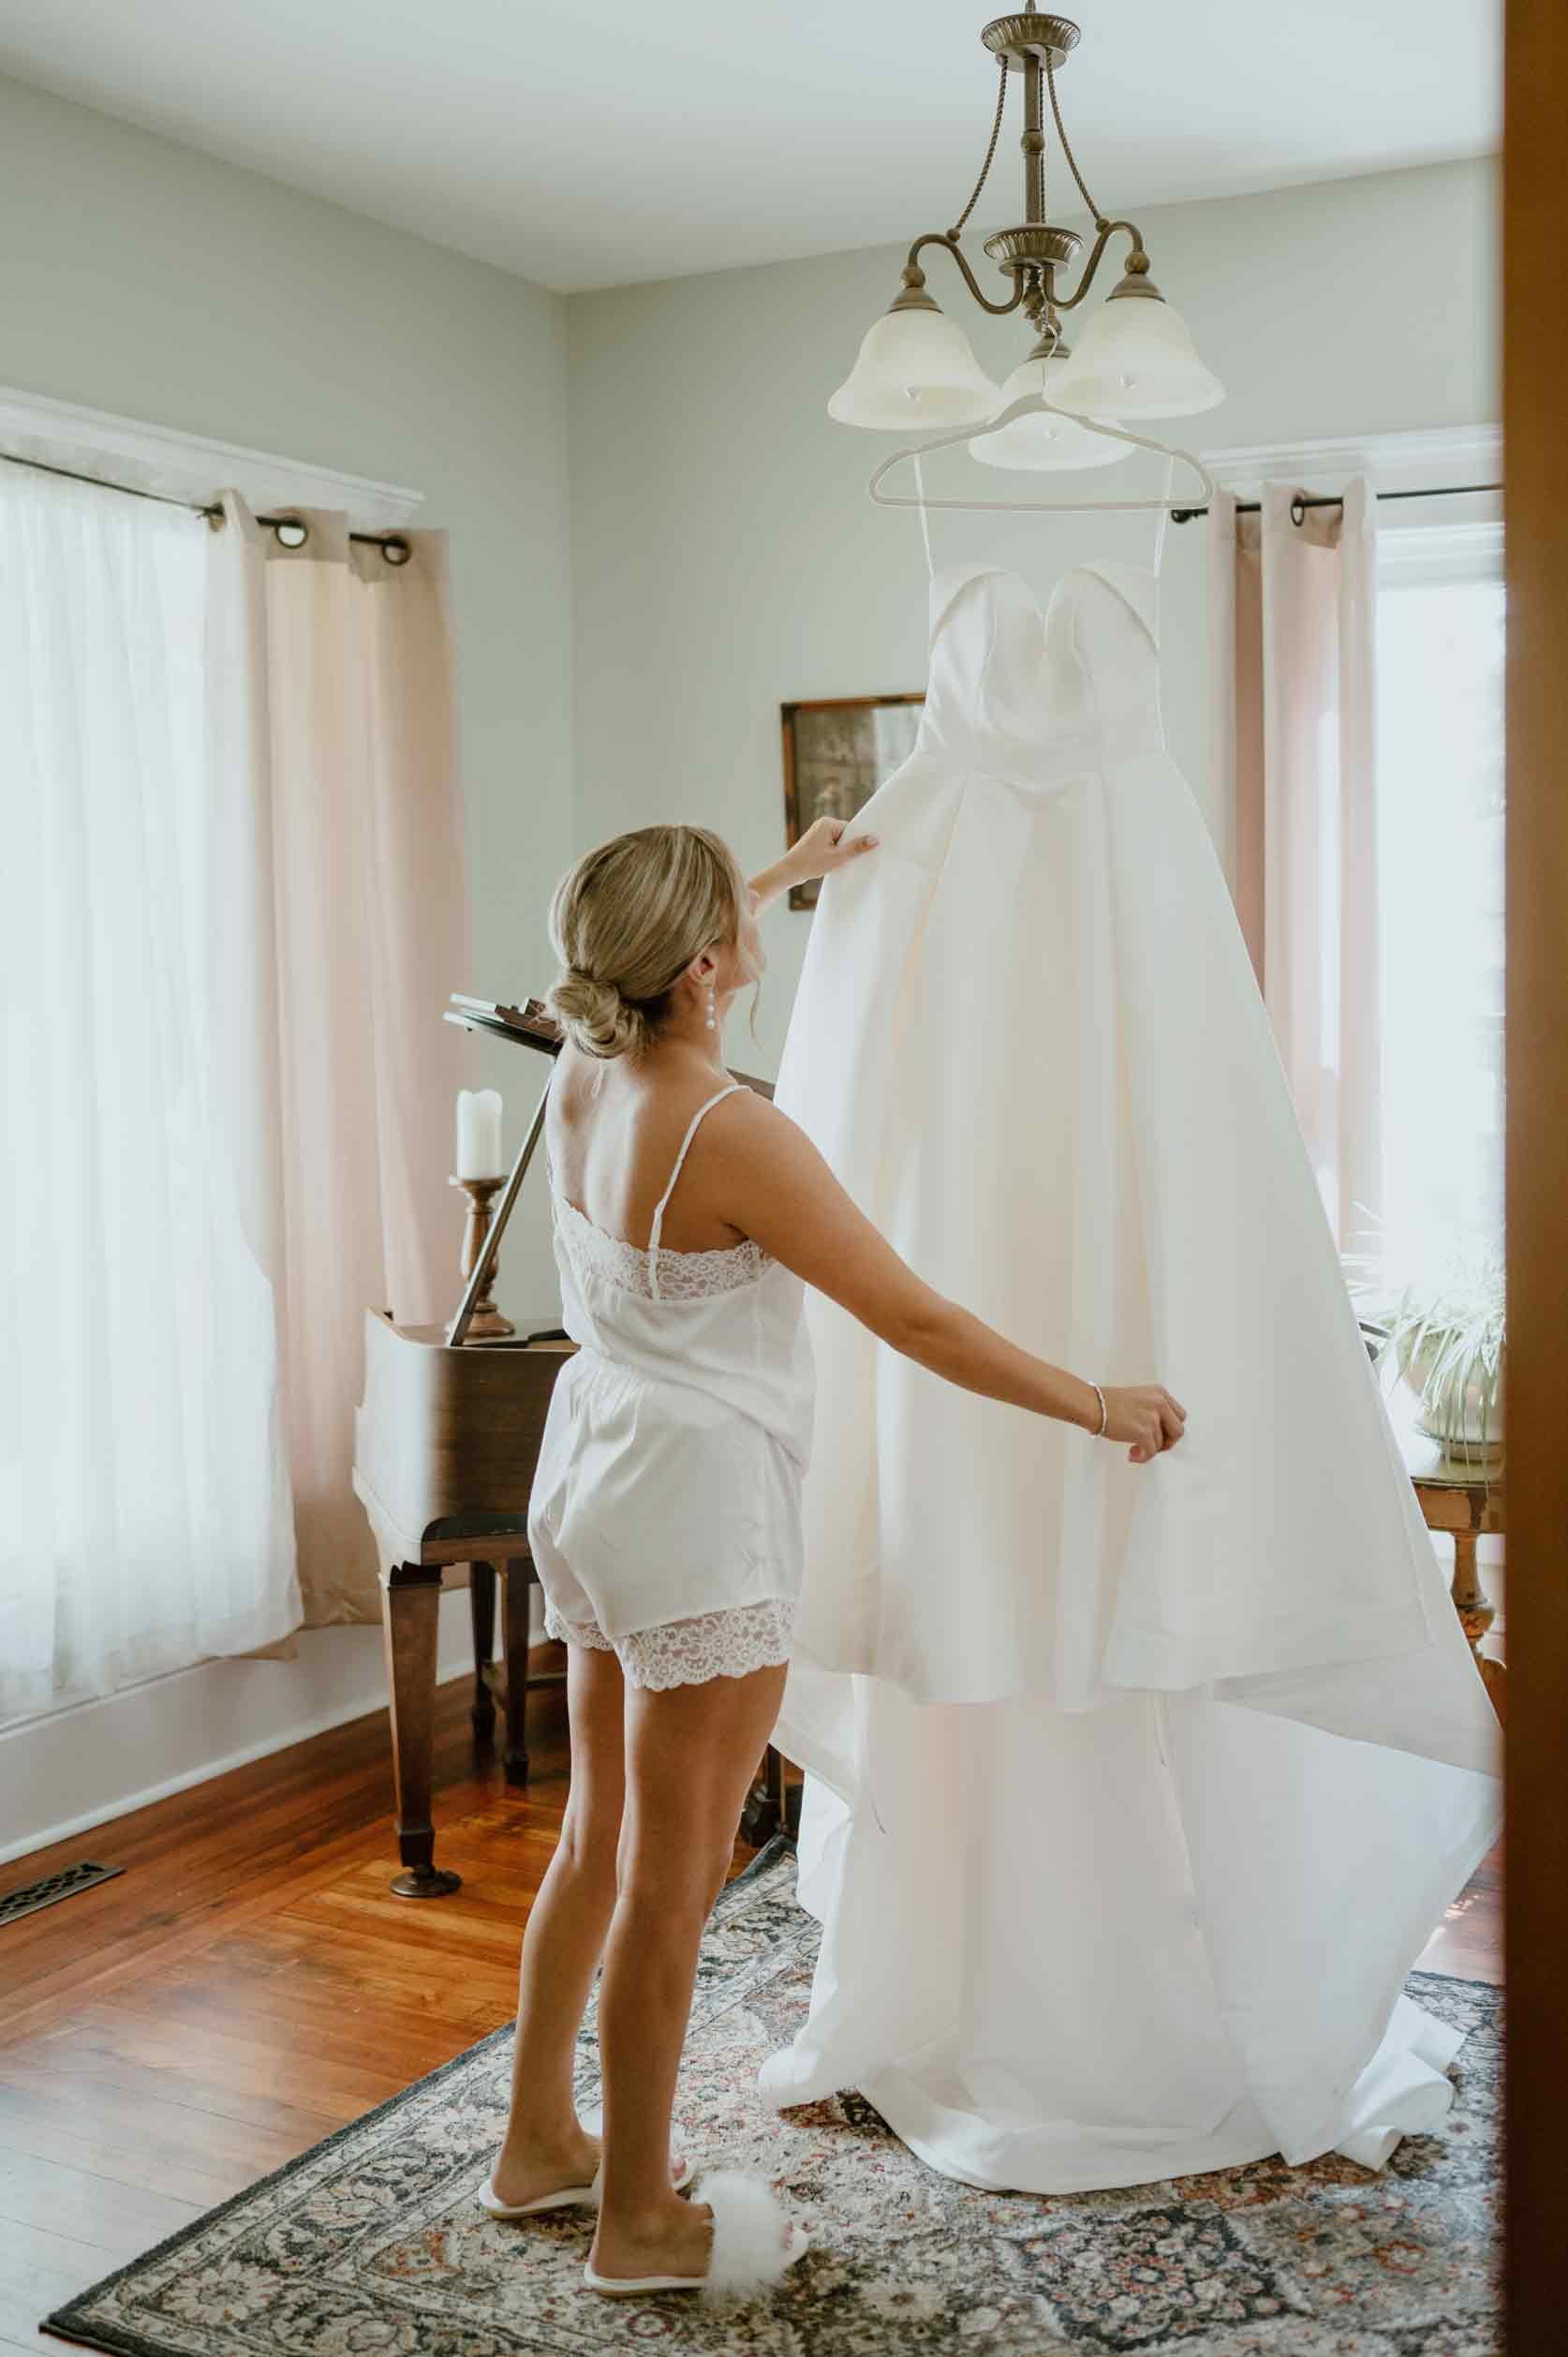 bride-with-gown-getting-ready.jpg